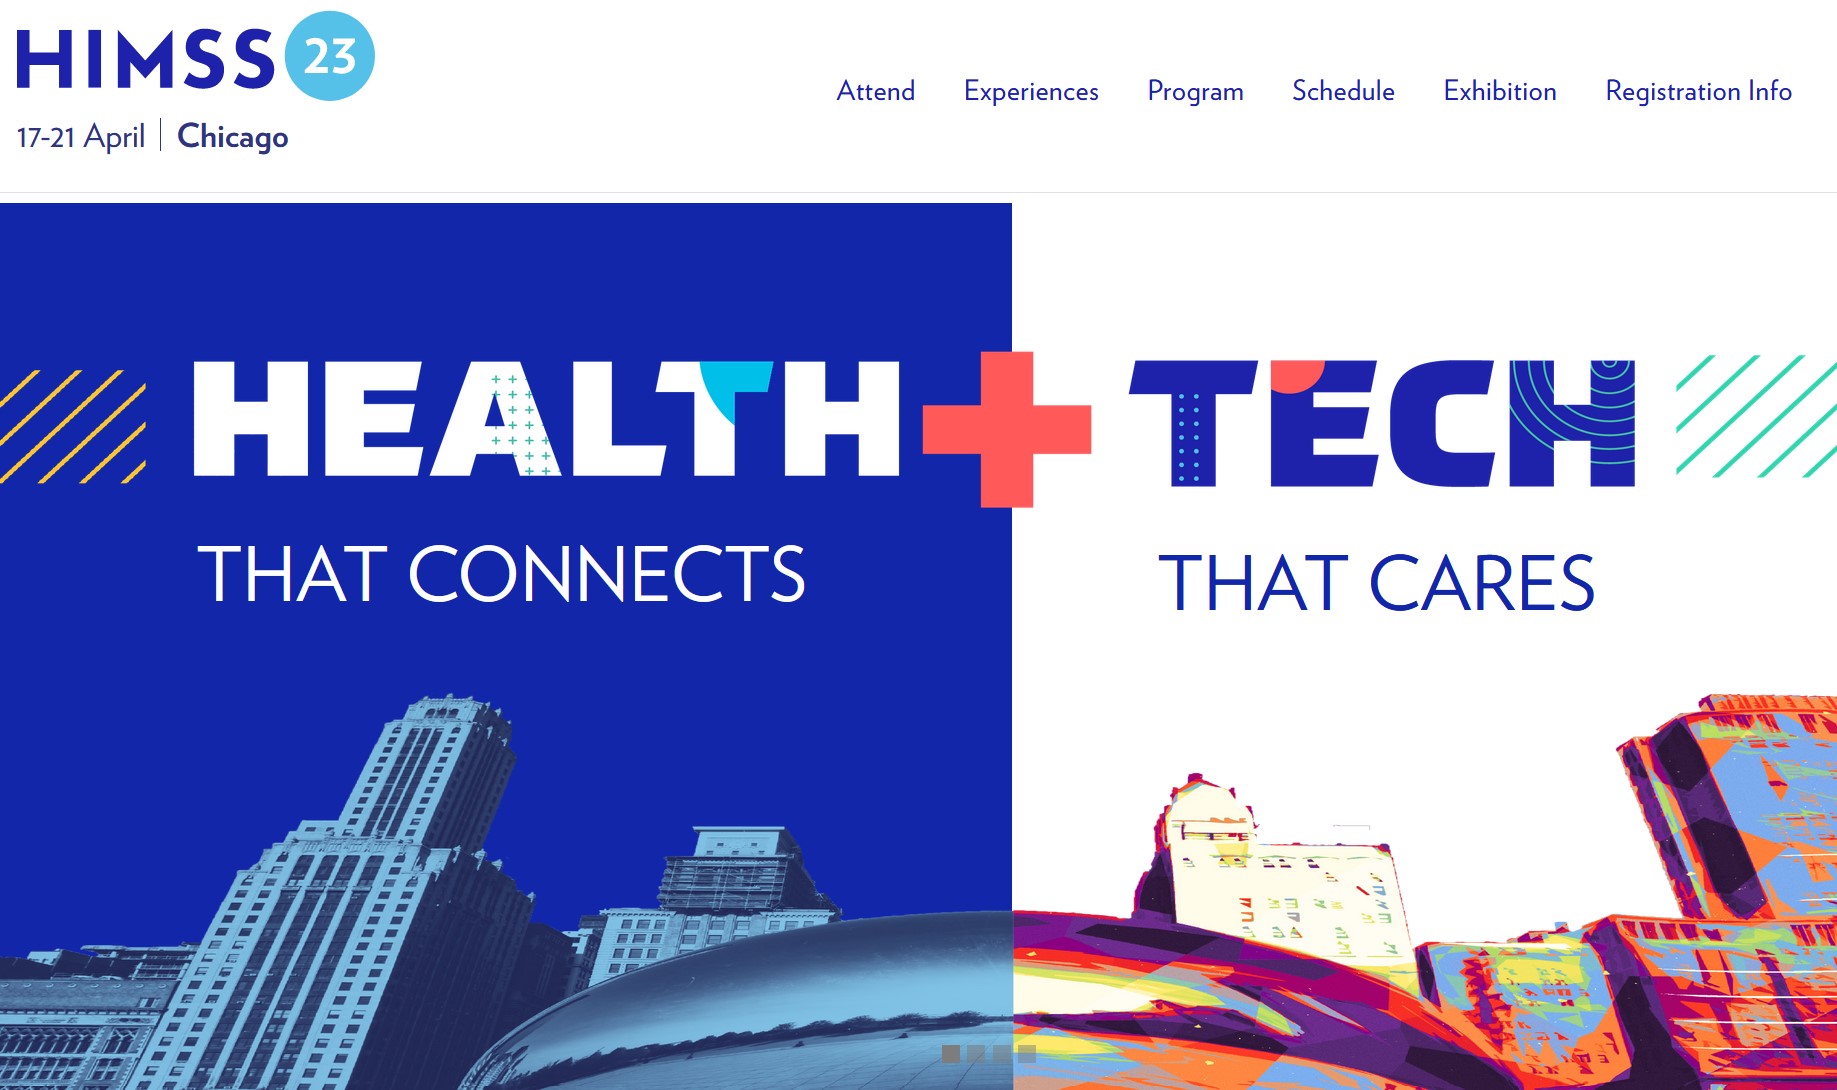 HIMSS23 Global Health Conference & Exhibition (D-A-CH Track)